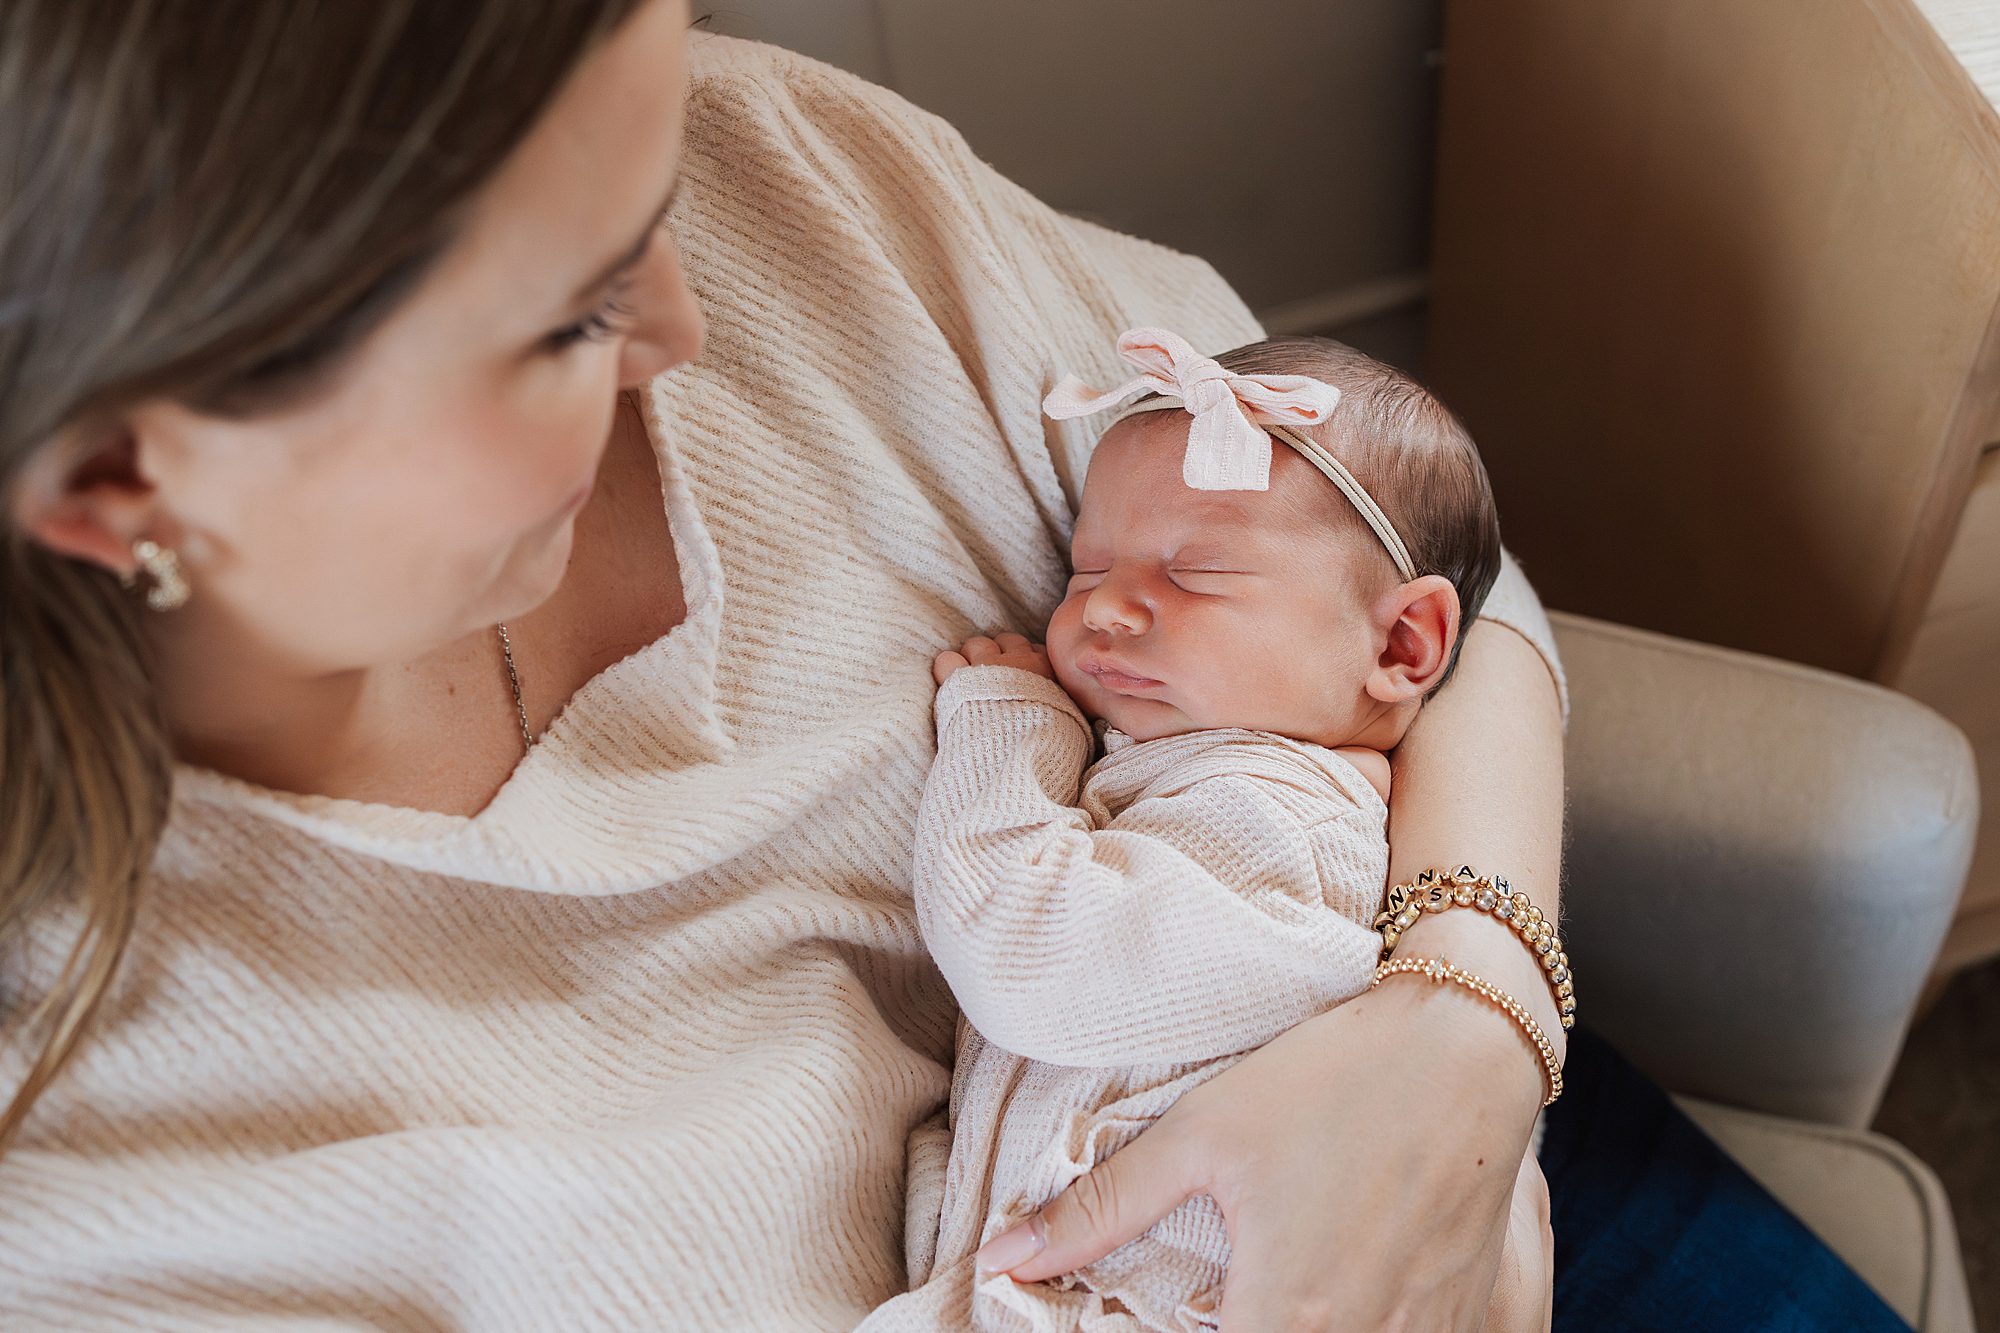 mother holding a sleeping newborn adorned with a bow headband.